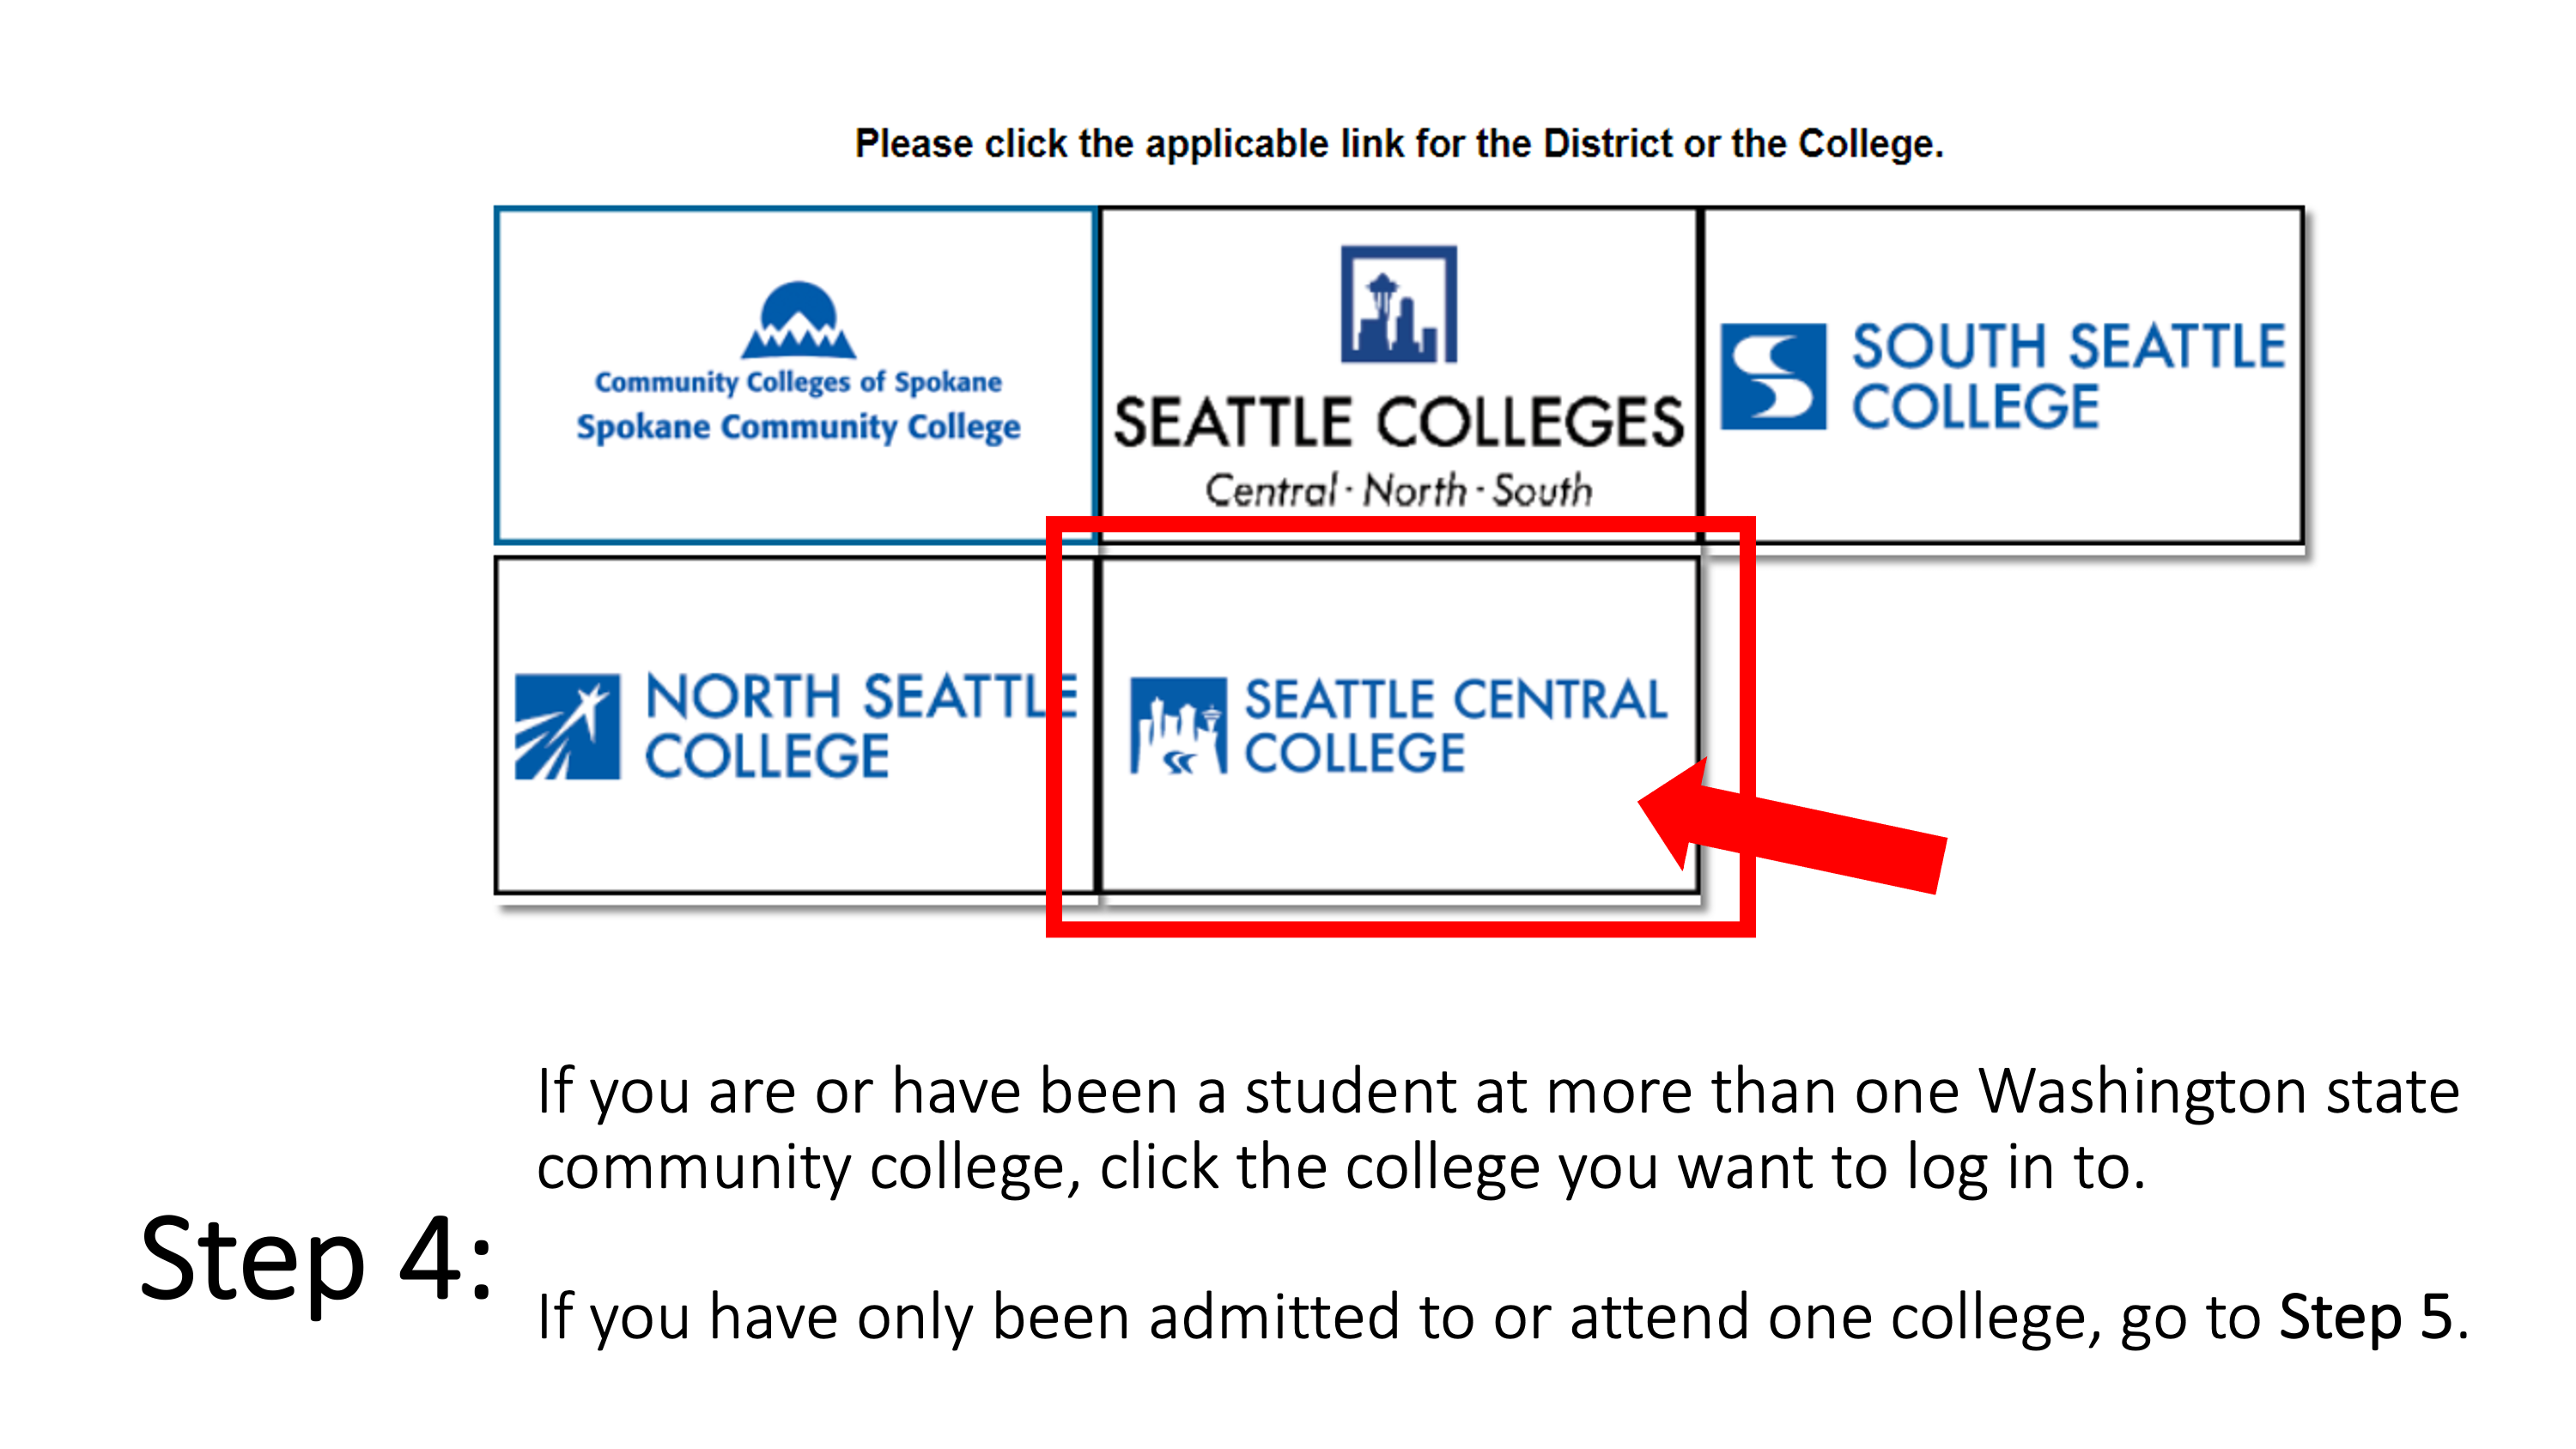 If you are or have been a student at more than one Washington state community college, click the college you want to log in to. If you have only been admitted to or attend one college, go to Step 5.